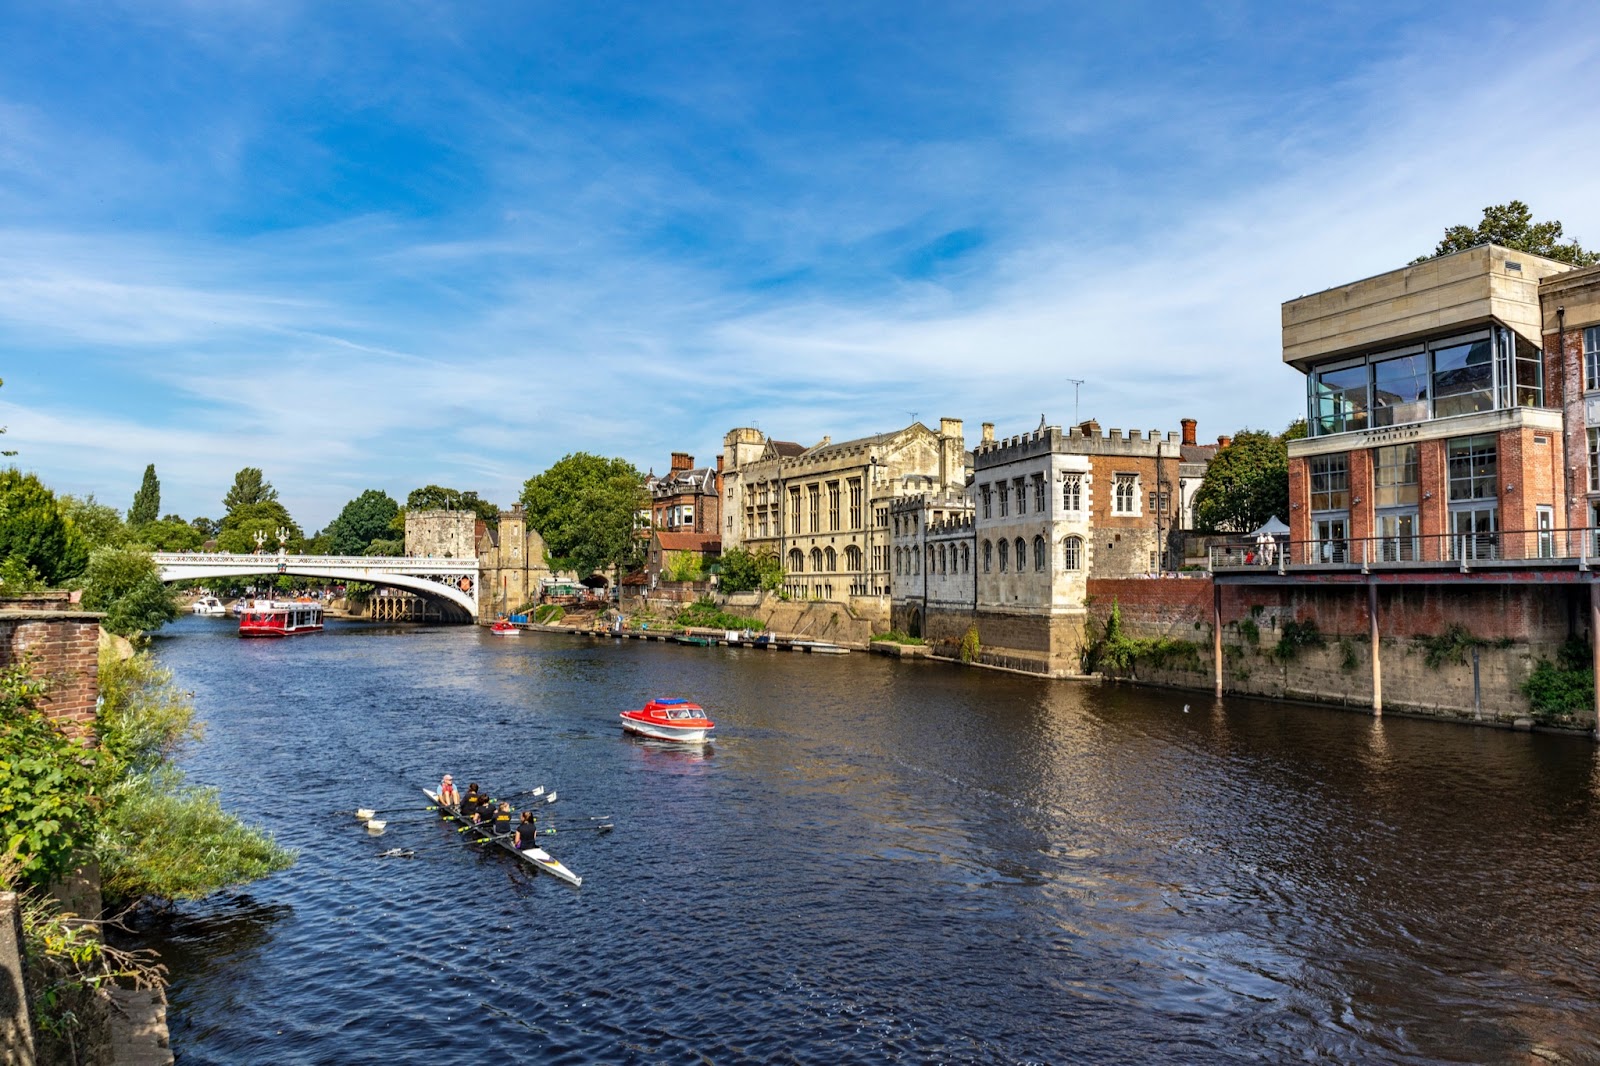 York in England, travel the world cheap with venturing to smaller cities